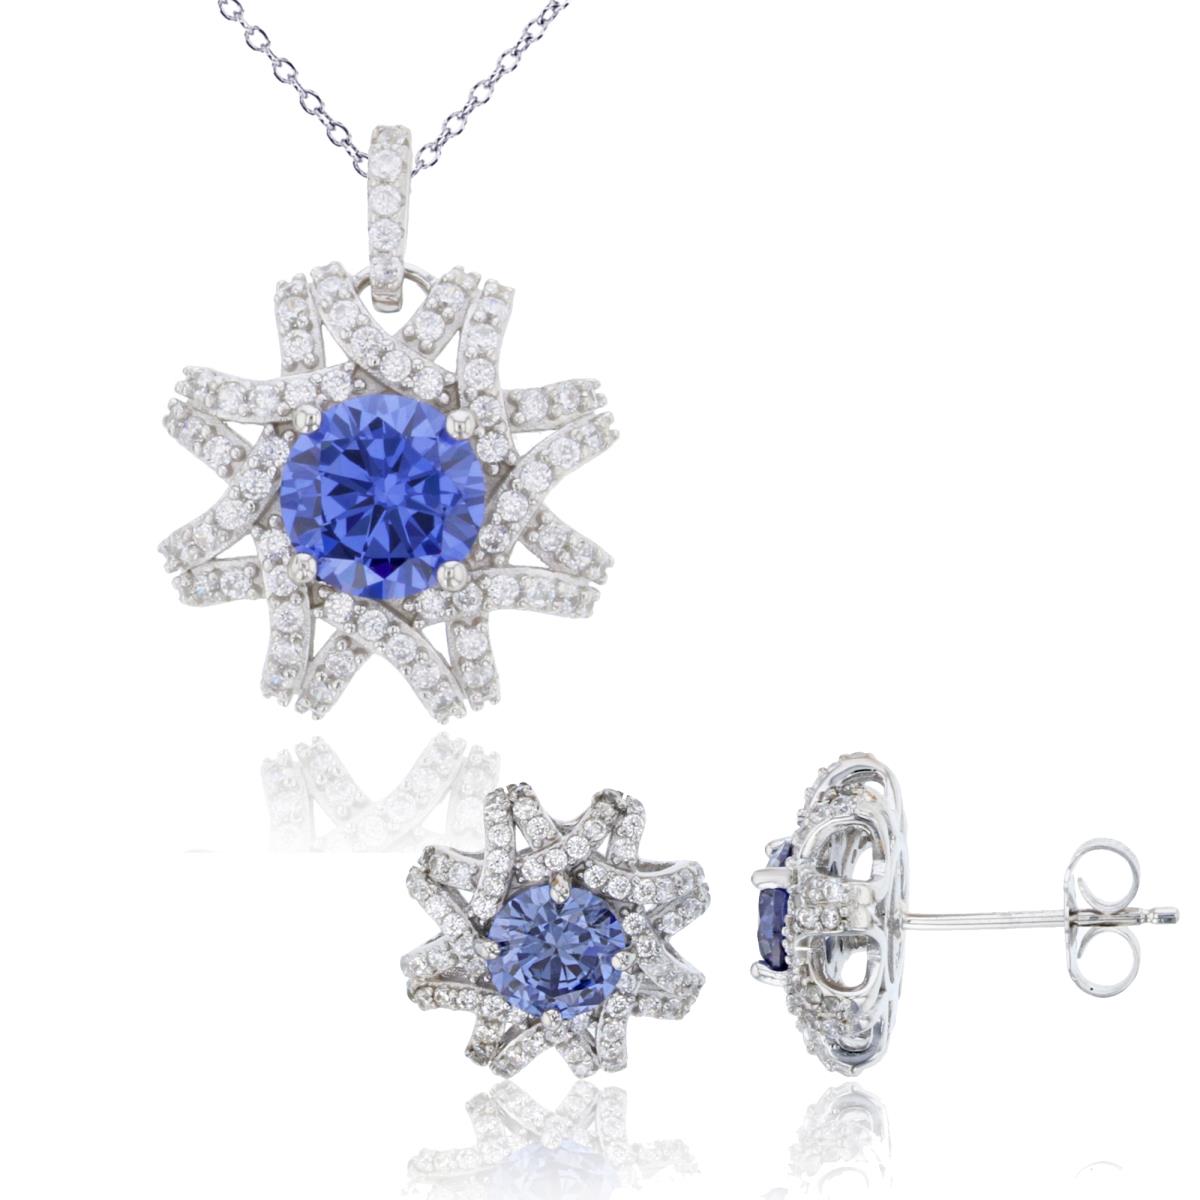 Sterling Silver Rhodium 8mm Rnd Tanzanite CZ Knot Flower 18" Necklace & Earring Set